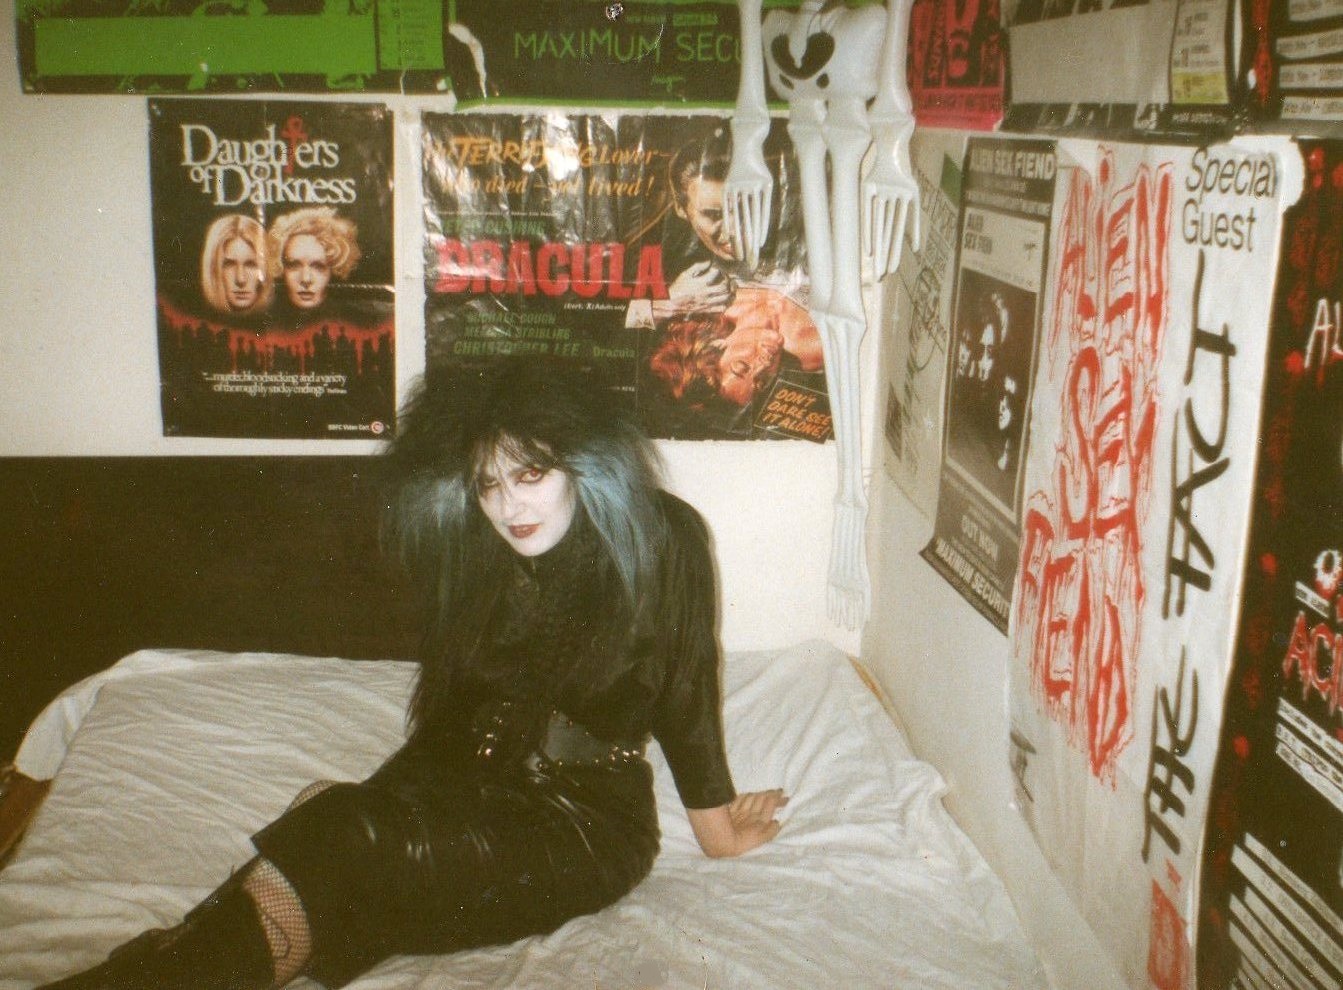 1990s Teenagers and Their Bedrooms Walls - Flashbak